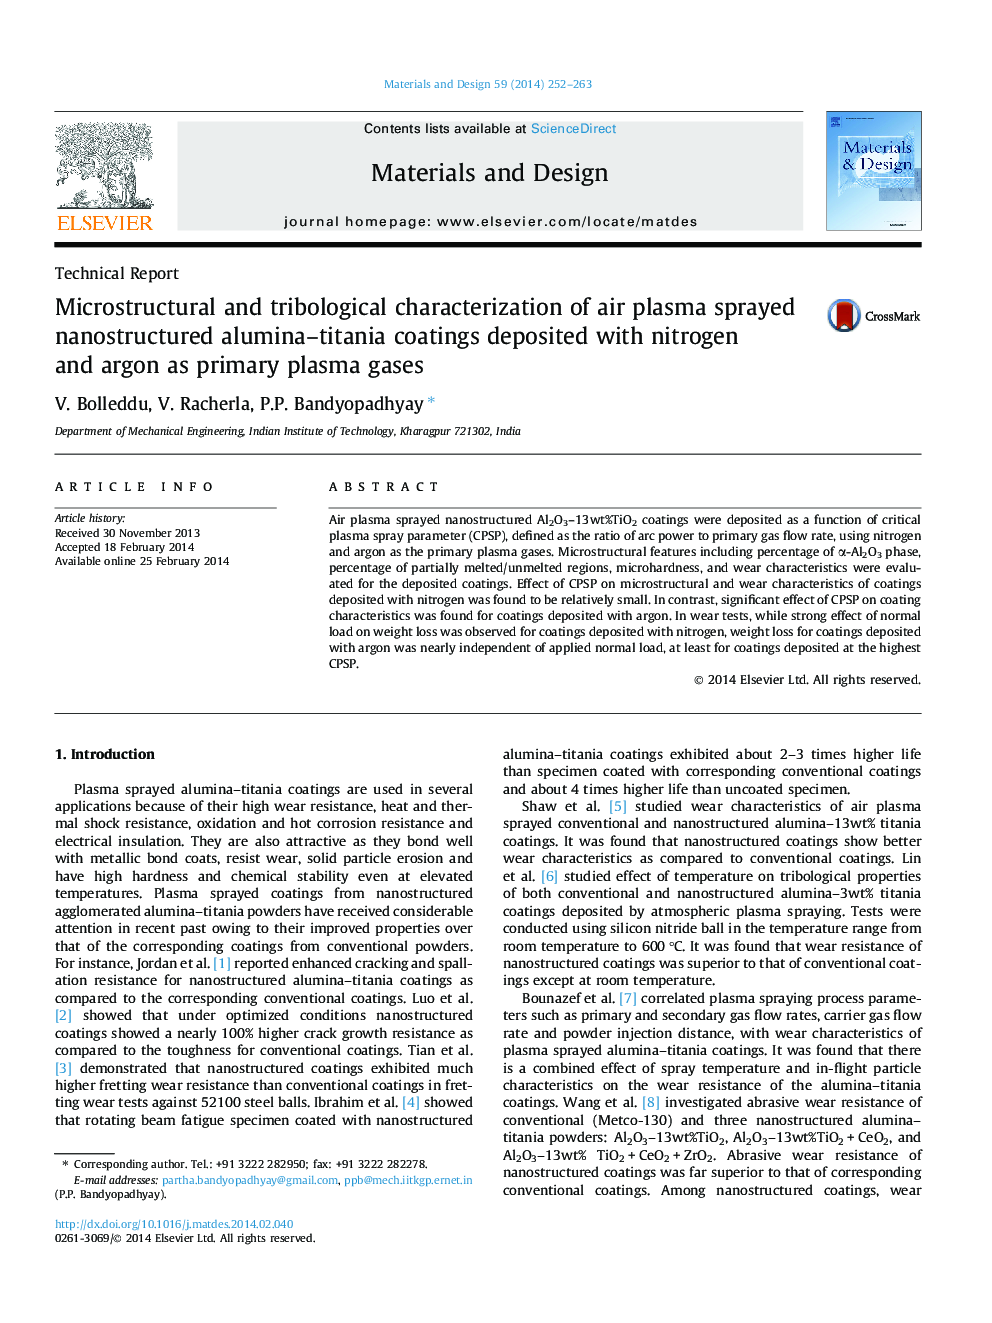 Microstructural and tribological characterization of air plasma sprayed nanostructured alumina-titania coatings deposited with nitrogen and argon as primary plasma gases